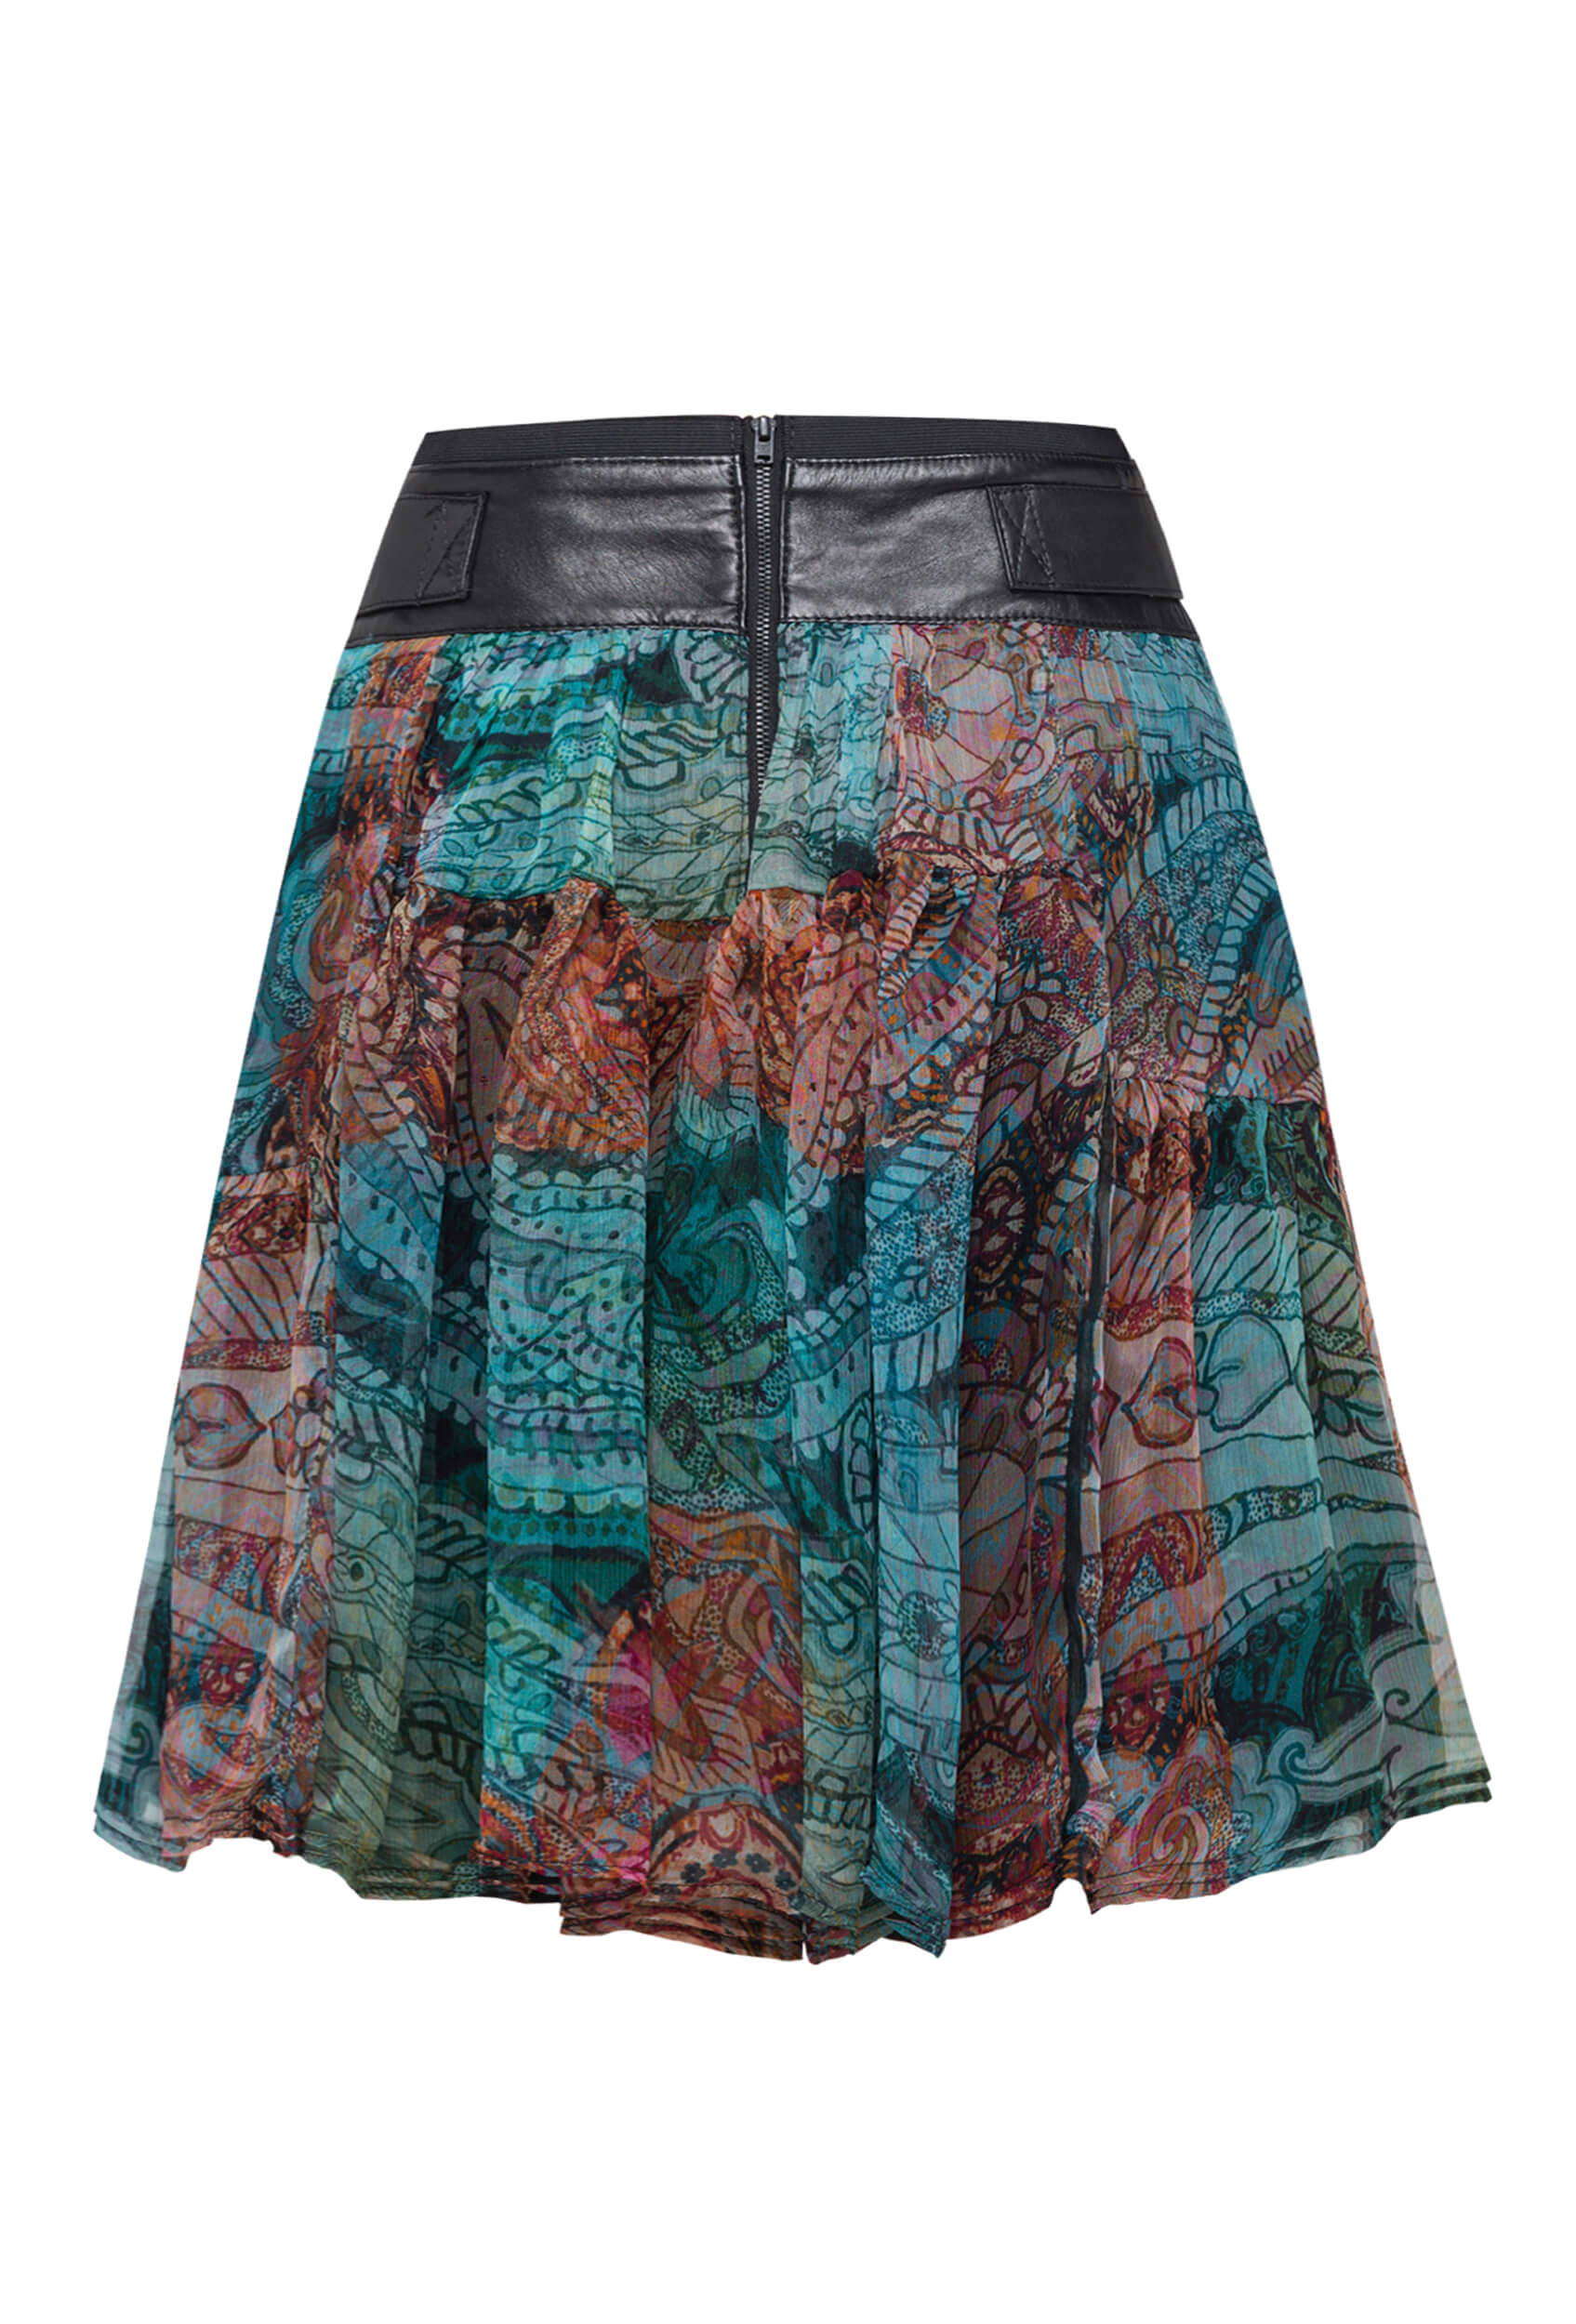 silk and leather skirt, silk skirt with leather yoke and belt, skirt with multicolor pattern, skirt  made of Italian leather, skirt with yoke made of natural leather and silk chiffon